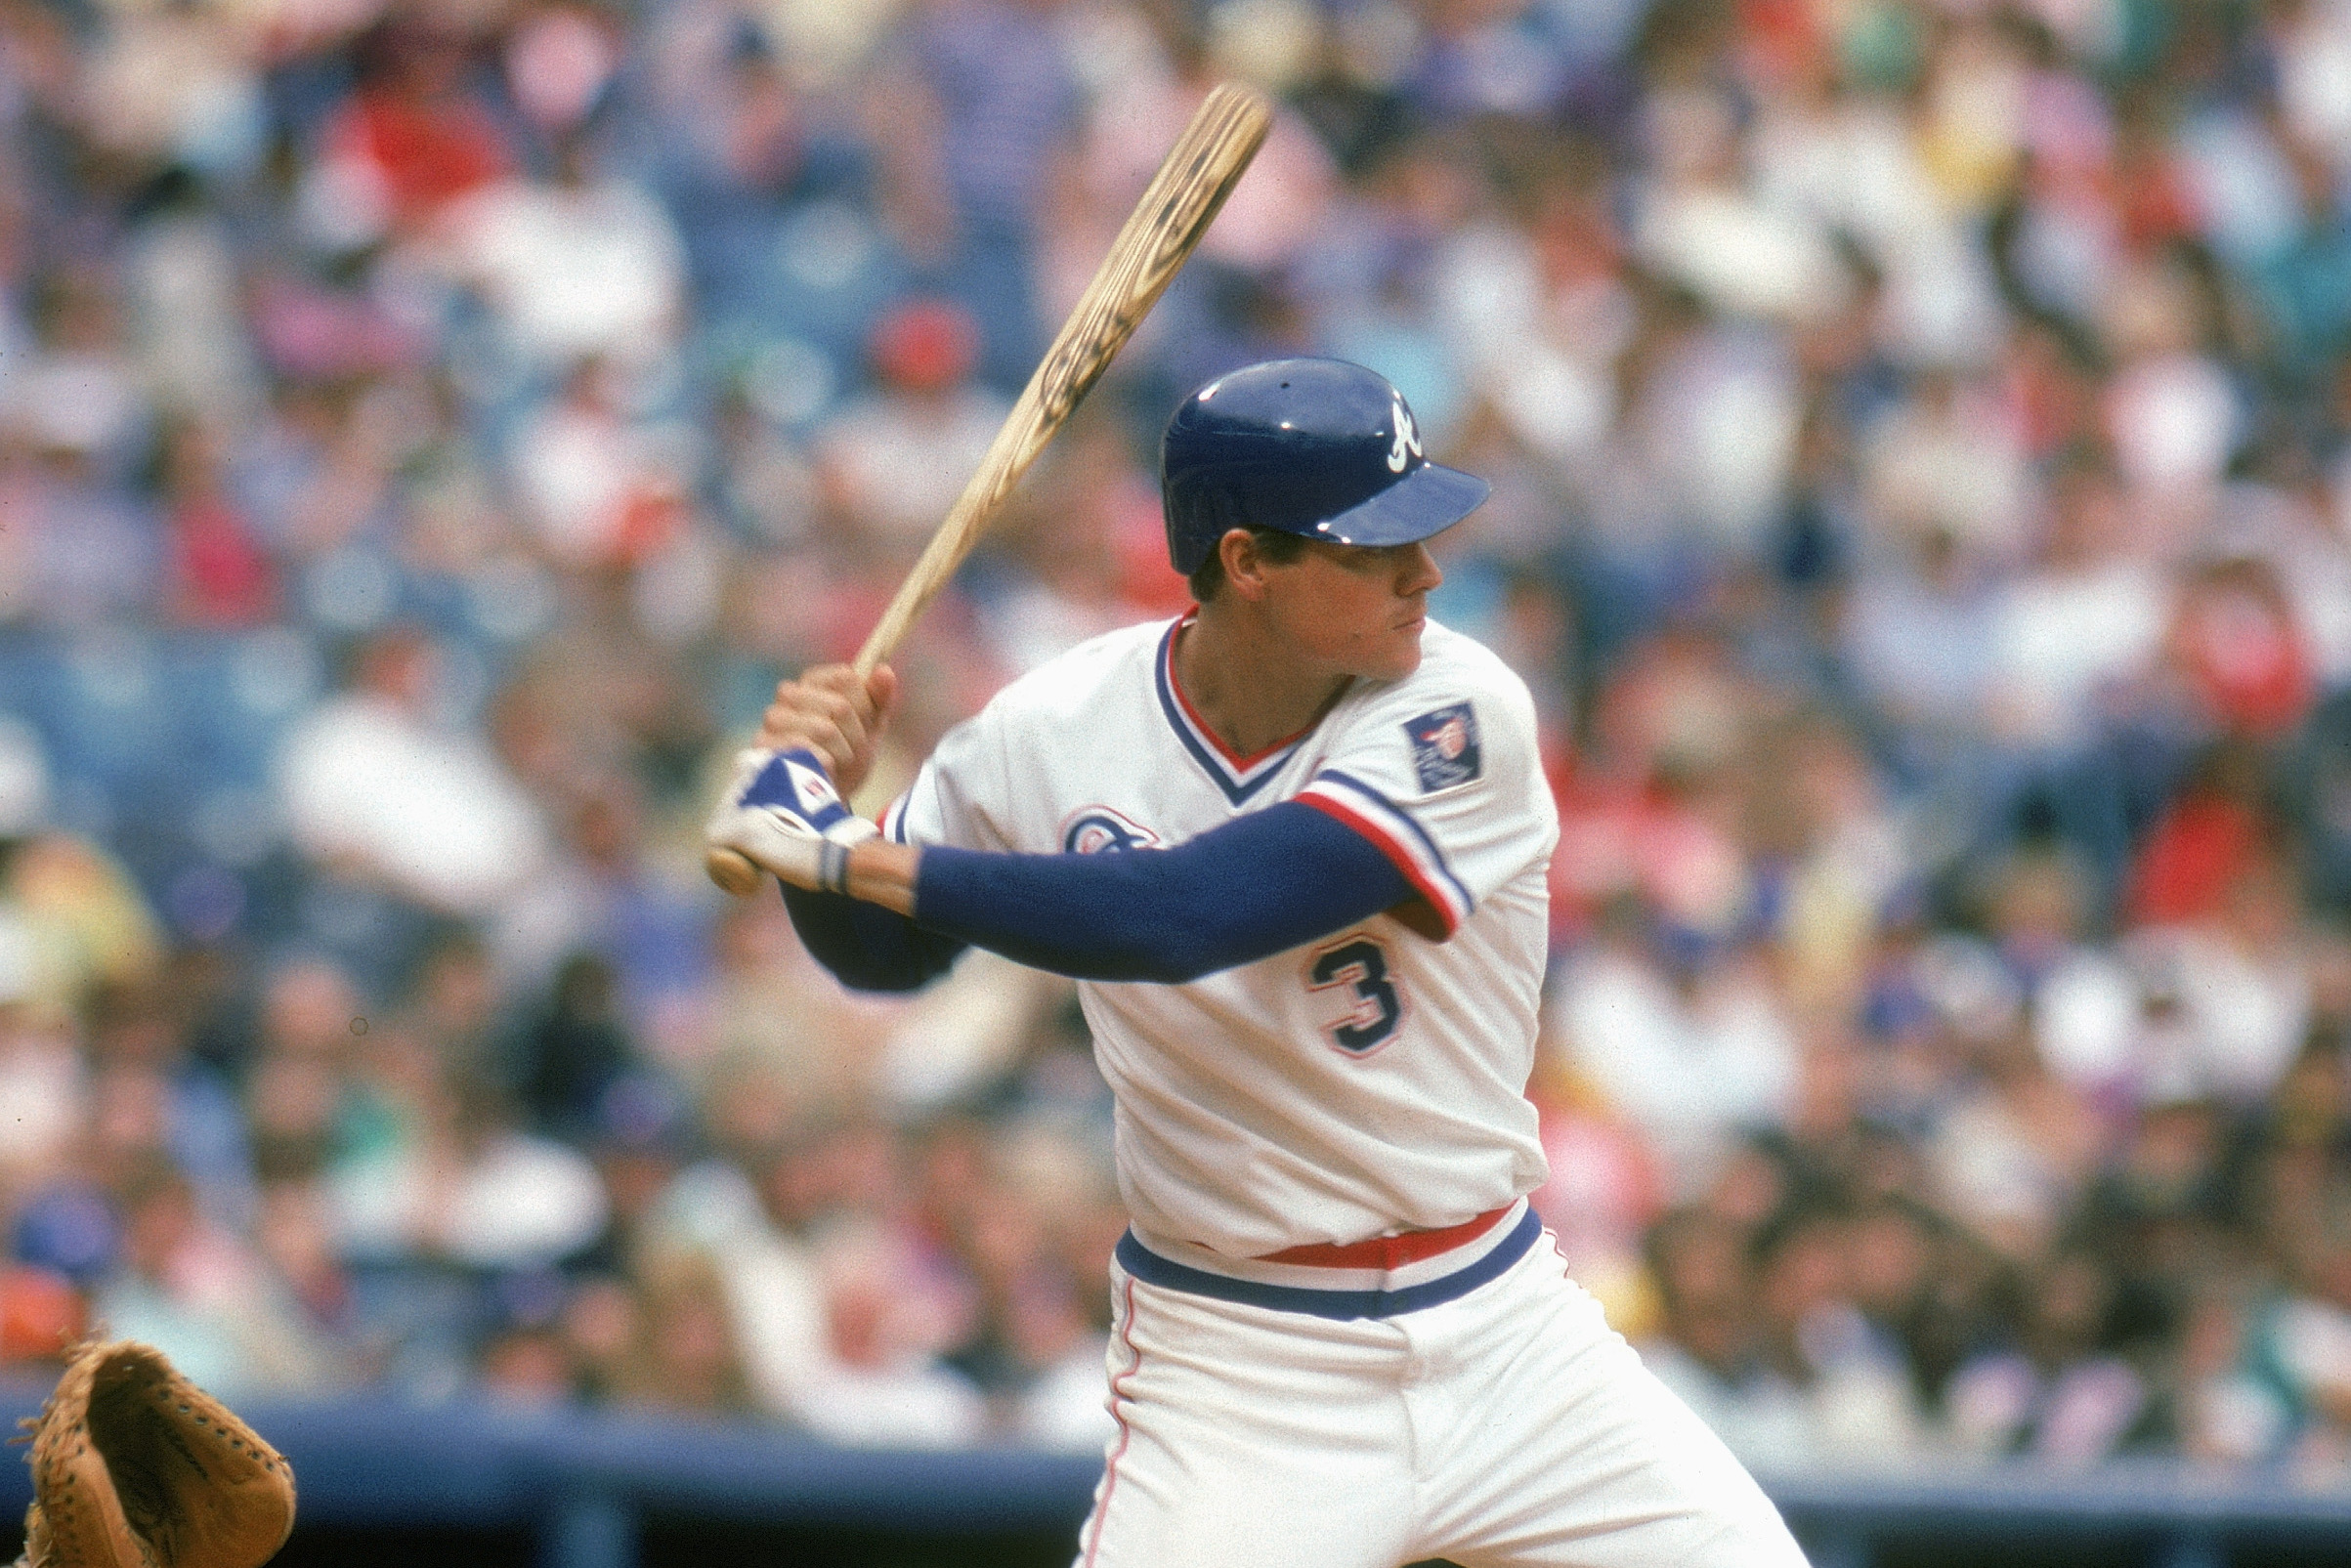 Atlanta Braves - Braves Hall of Famer Dale Murphy at the plate. #TBT